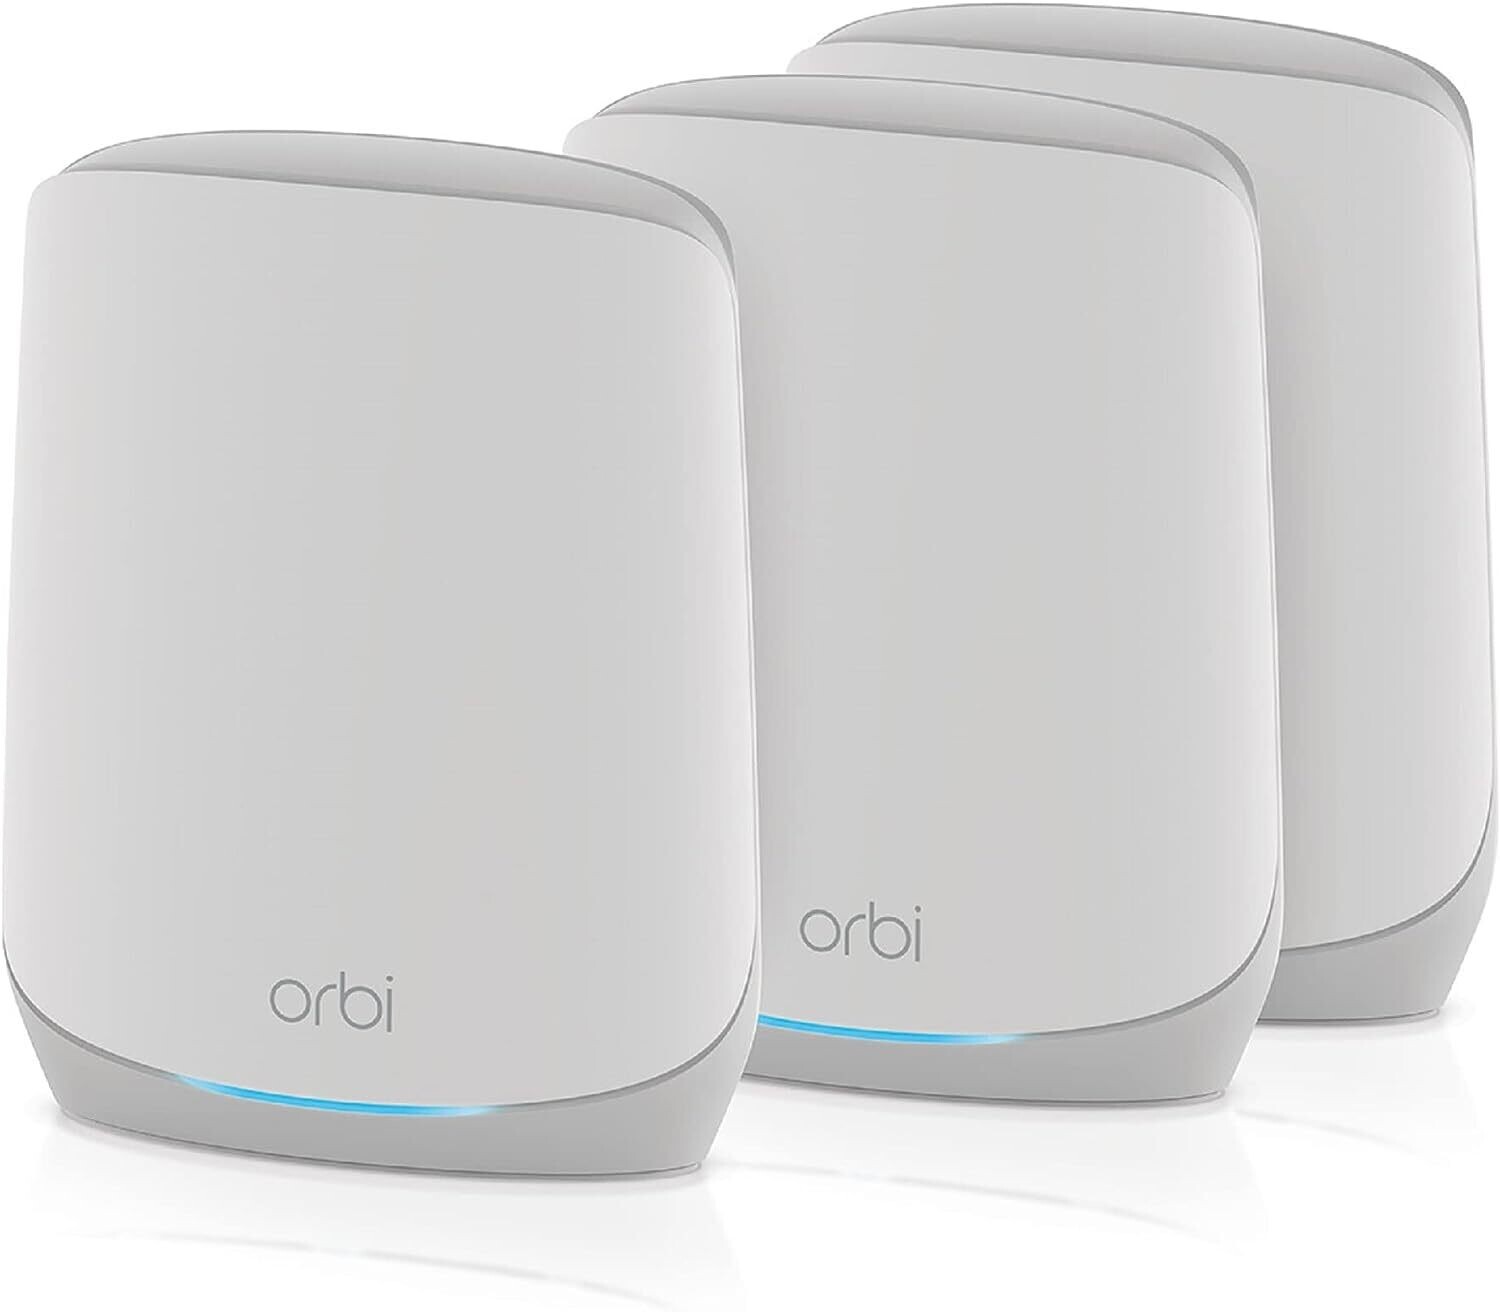 Netgear Orbi RBK763S Tri-band WiFi 6 Mesh System, 5.4Gbps, Router and 2 Satellite